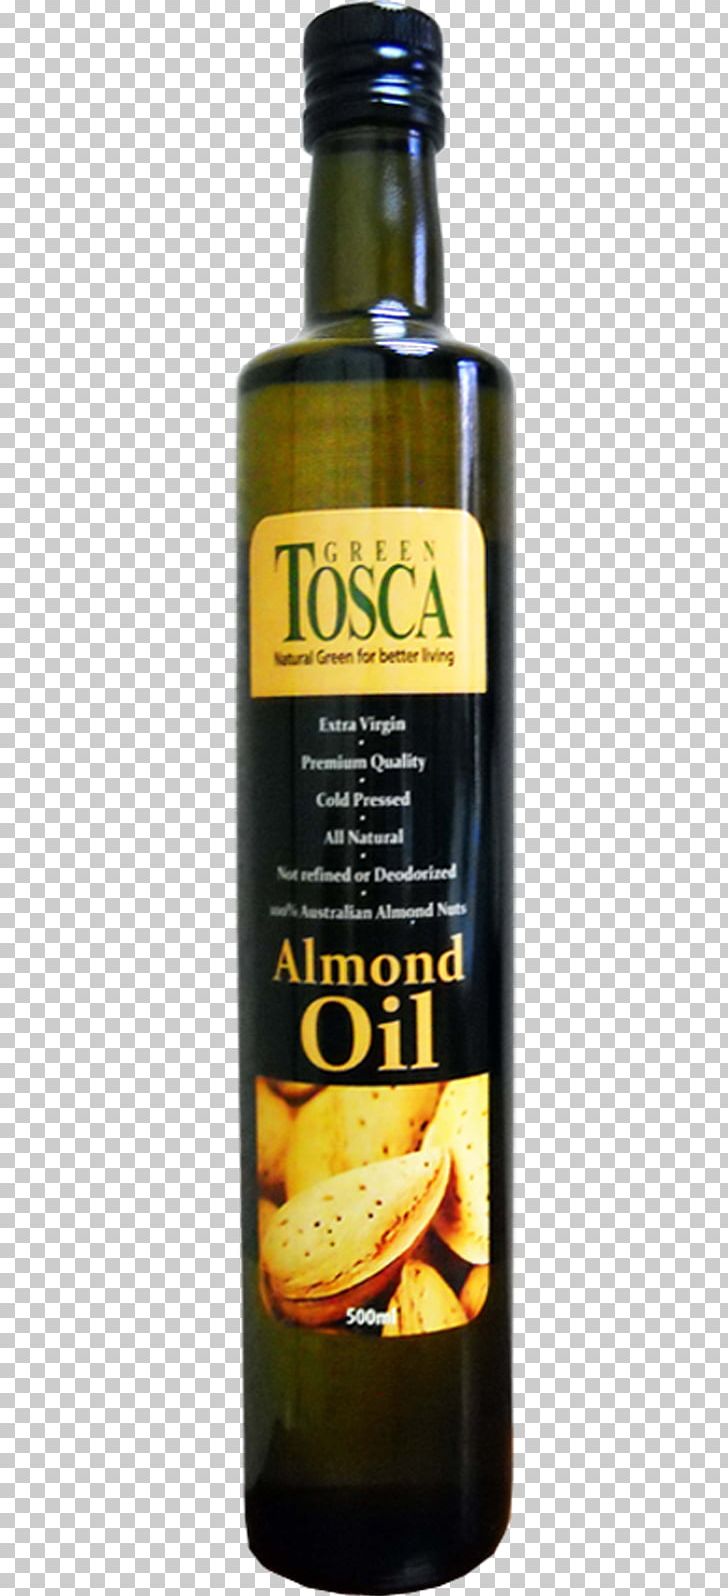 Vegetable Oil Olive Oil Almond Oil PNG, Clipart, Almond, Almond Oil, Avocado Oil, Bottle, Cooking Oil Free PNG Download